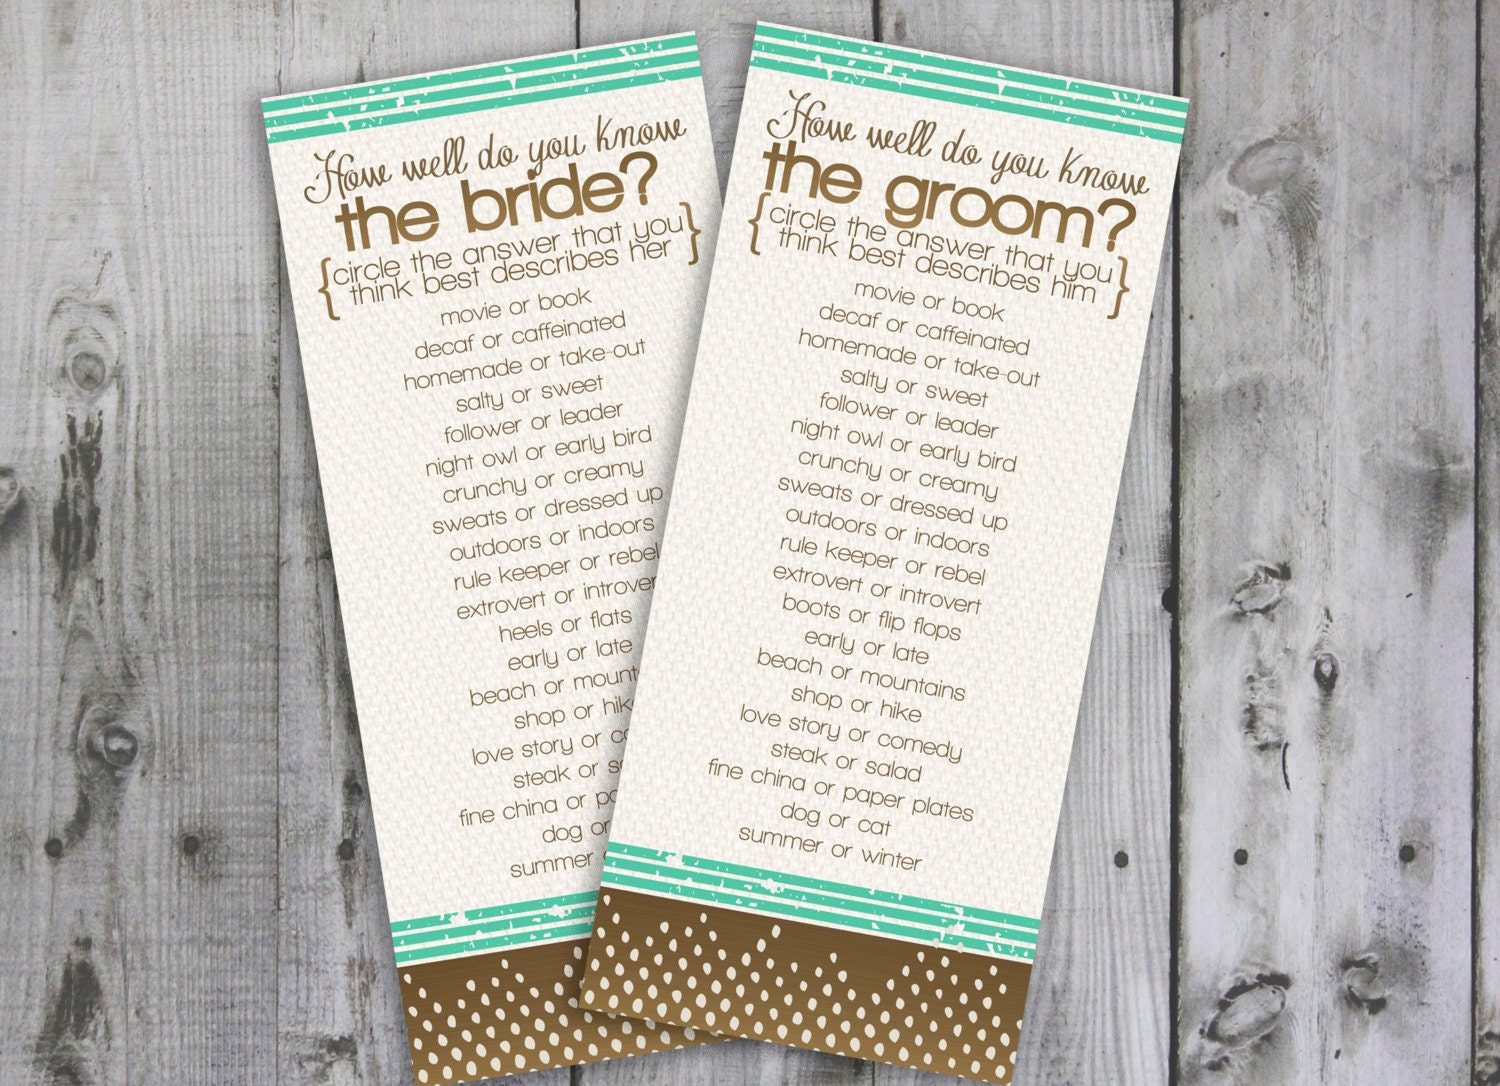 How well do you know the bride and groom shower by GrayPaperie